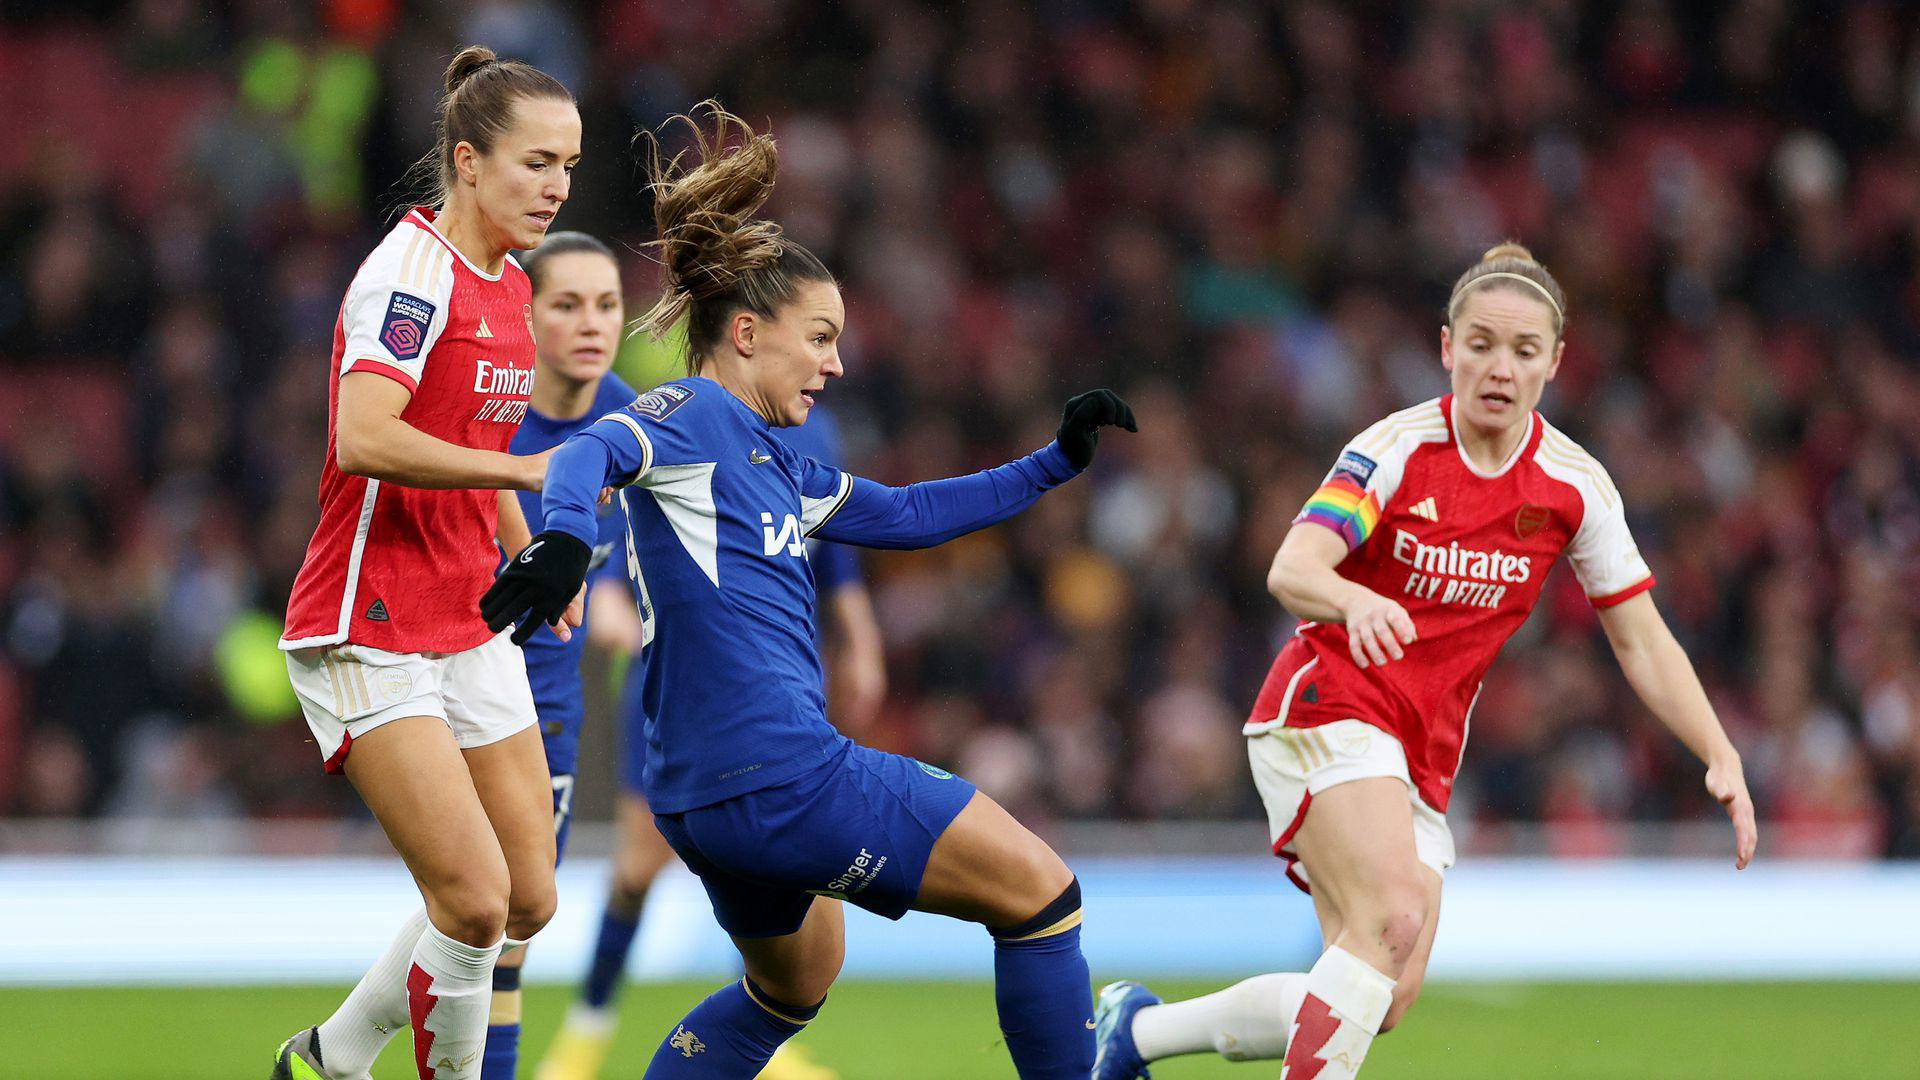 Watch Johanna Rytting Kaneryd Ties At 1 1 For Chelsea Against Arsenal